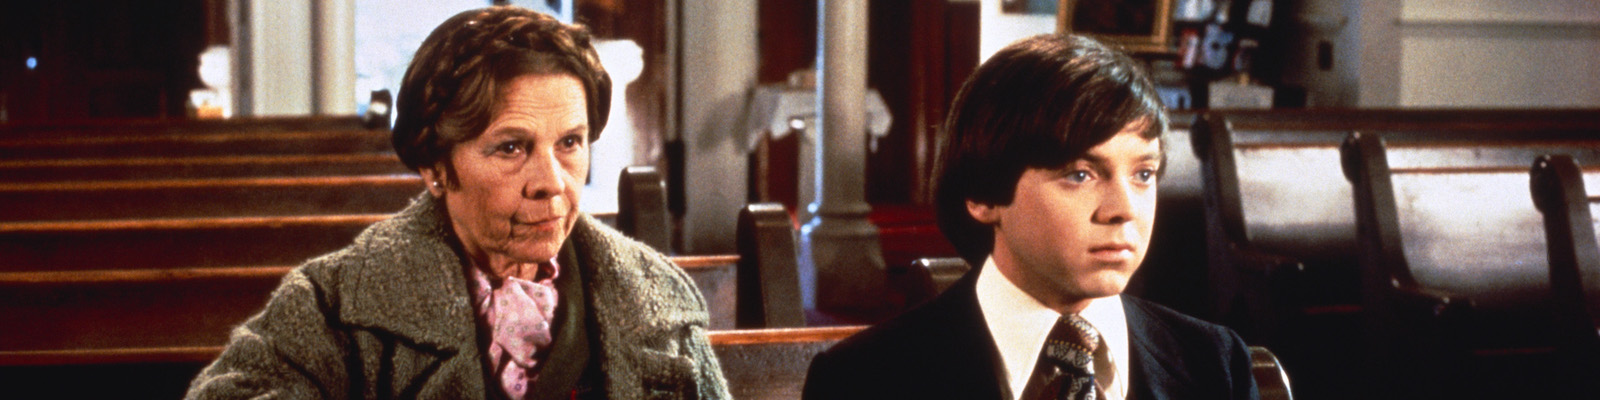 In a church, a white woman in her 80s (Ruth Gordon as Maude) sits in the pew behind and slightle to the right of a white man in his twenties (Bud Cort as Harold). Maude wears her brown hair up in braids. She is in a brown, somewhat dingy wool overcoat with a pink silk scarf peeking out. Harold's dark hair is neatly combed across his head and swoops into his face. He is wearing a black suit coat, white shirt with pointed collars and a brown and silver geometric tie.